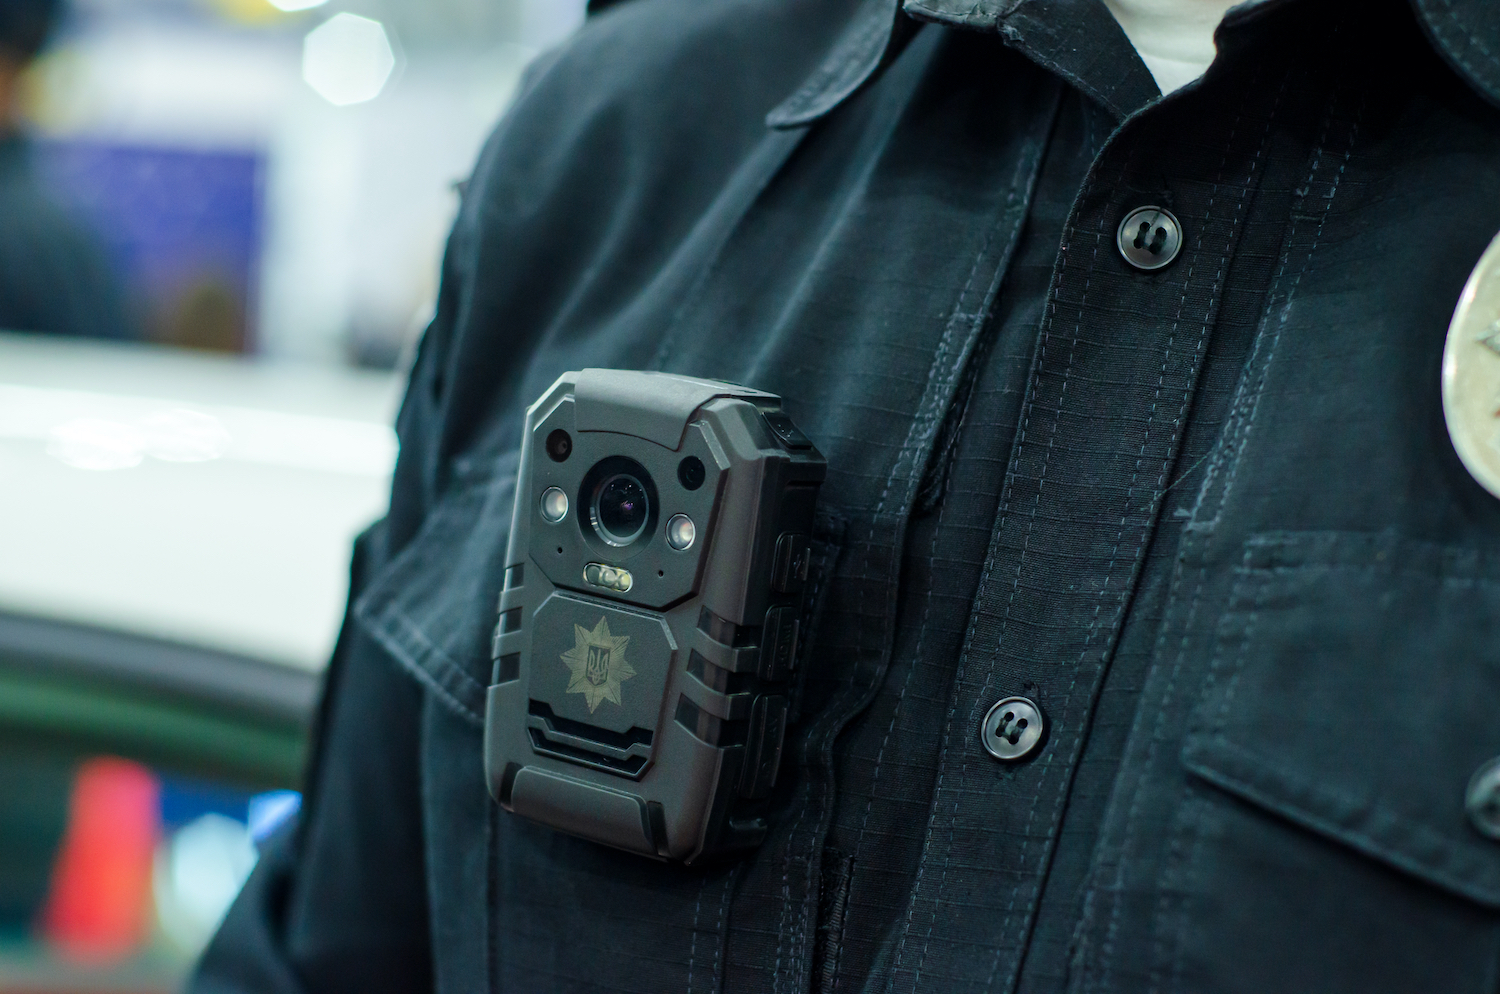 Police body cameras were supposed to build trust. So far, they haven’t.